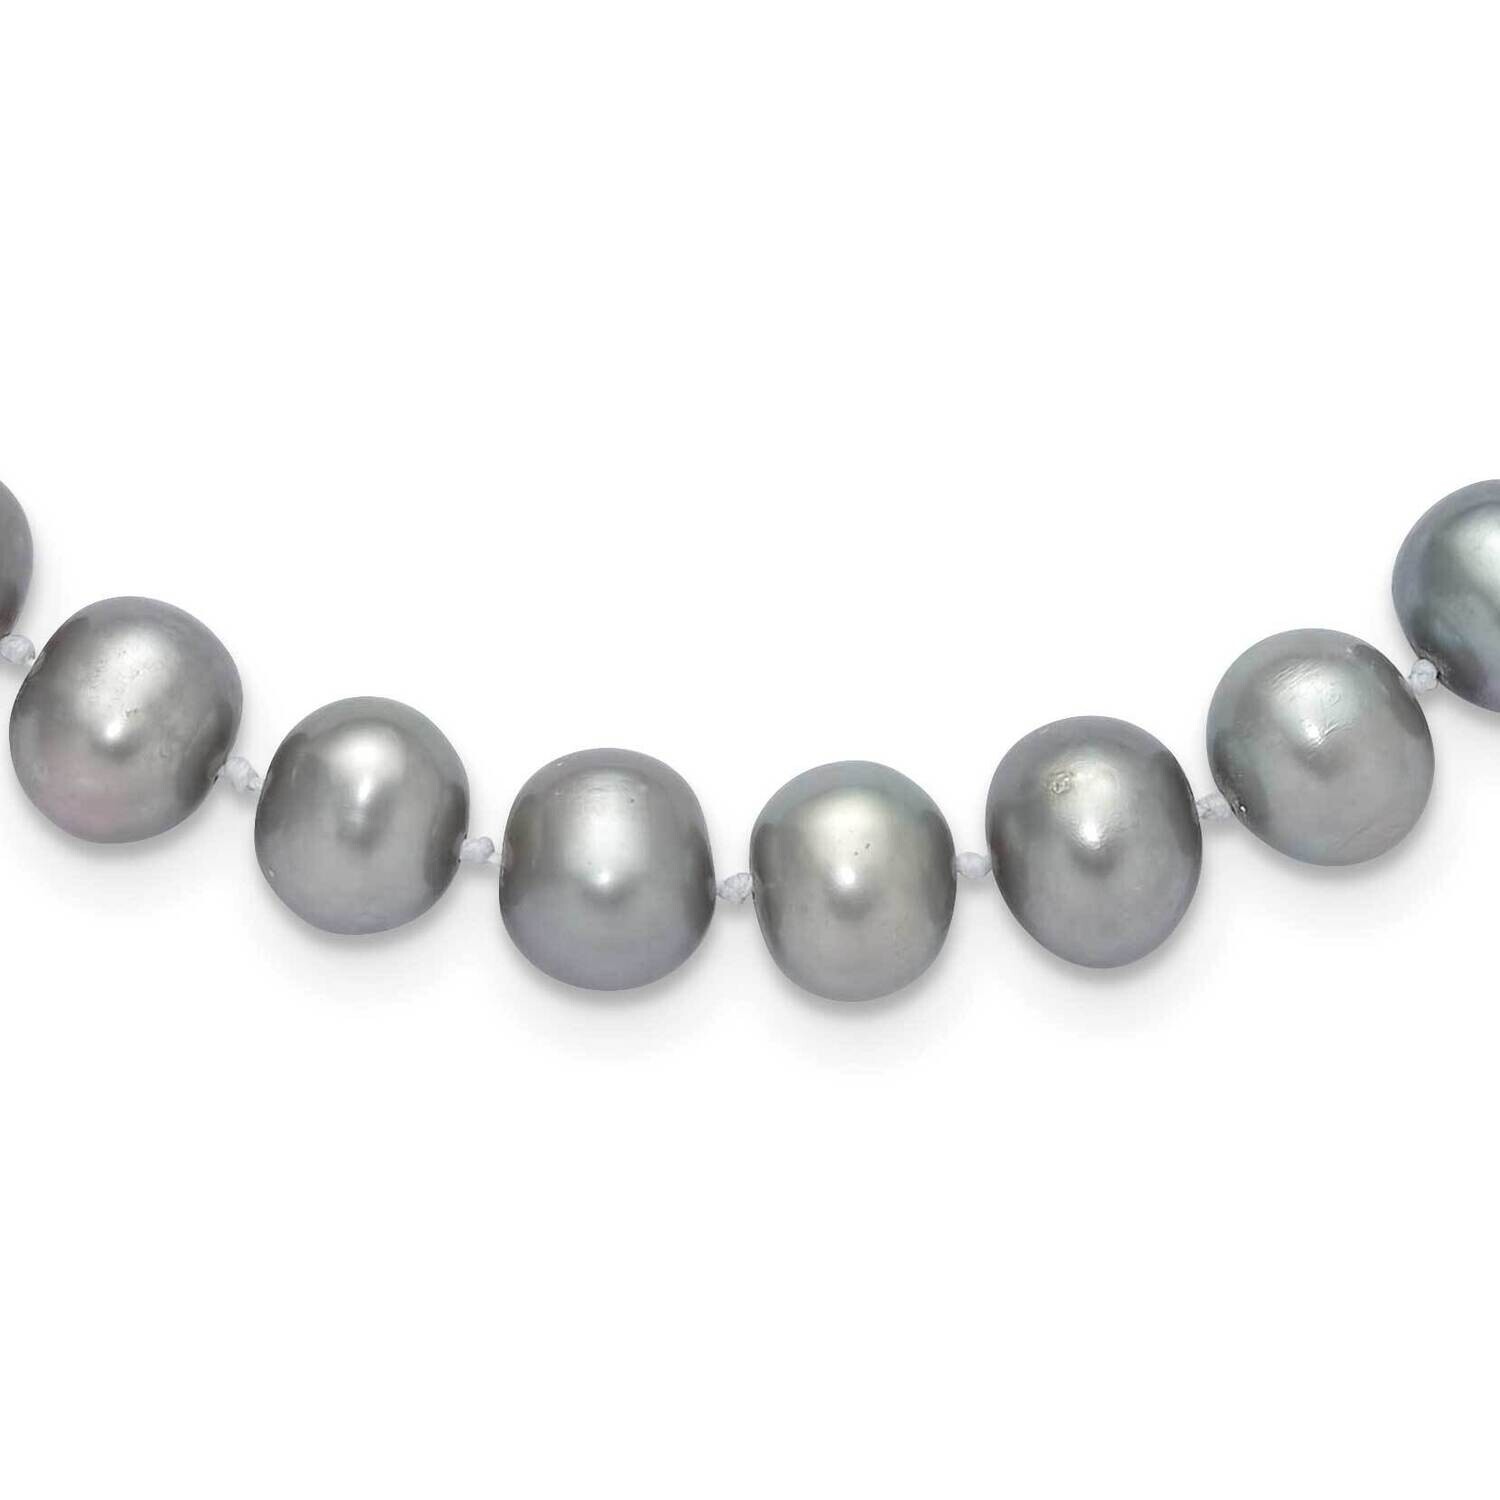 8-9mm Near Round Grey Fwc Pearl 18 Inch Necklace 14k Gold XF819-18